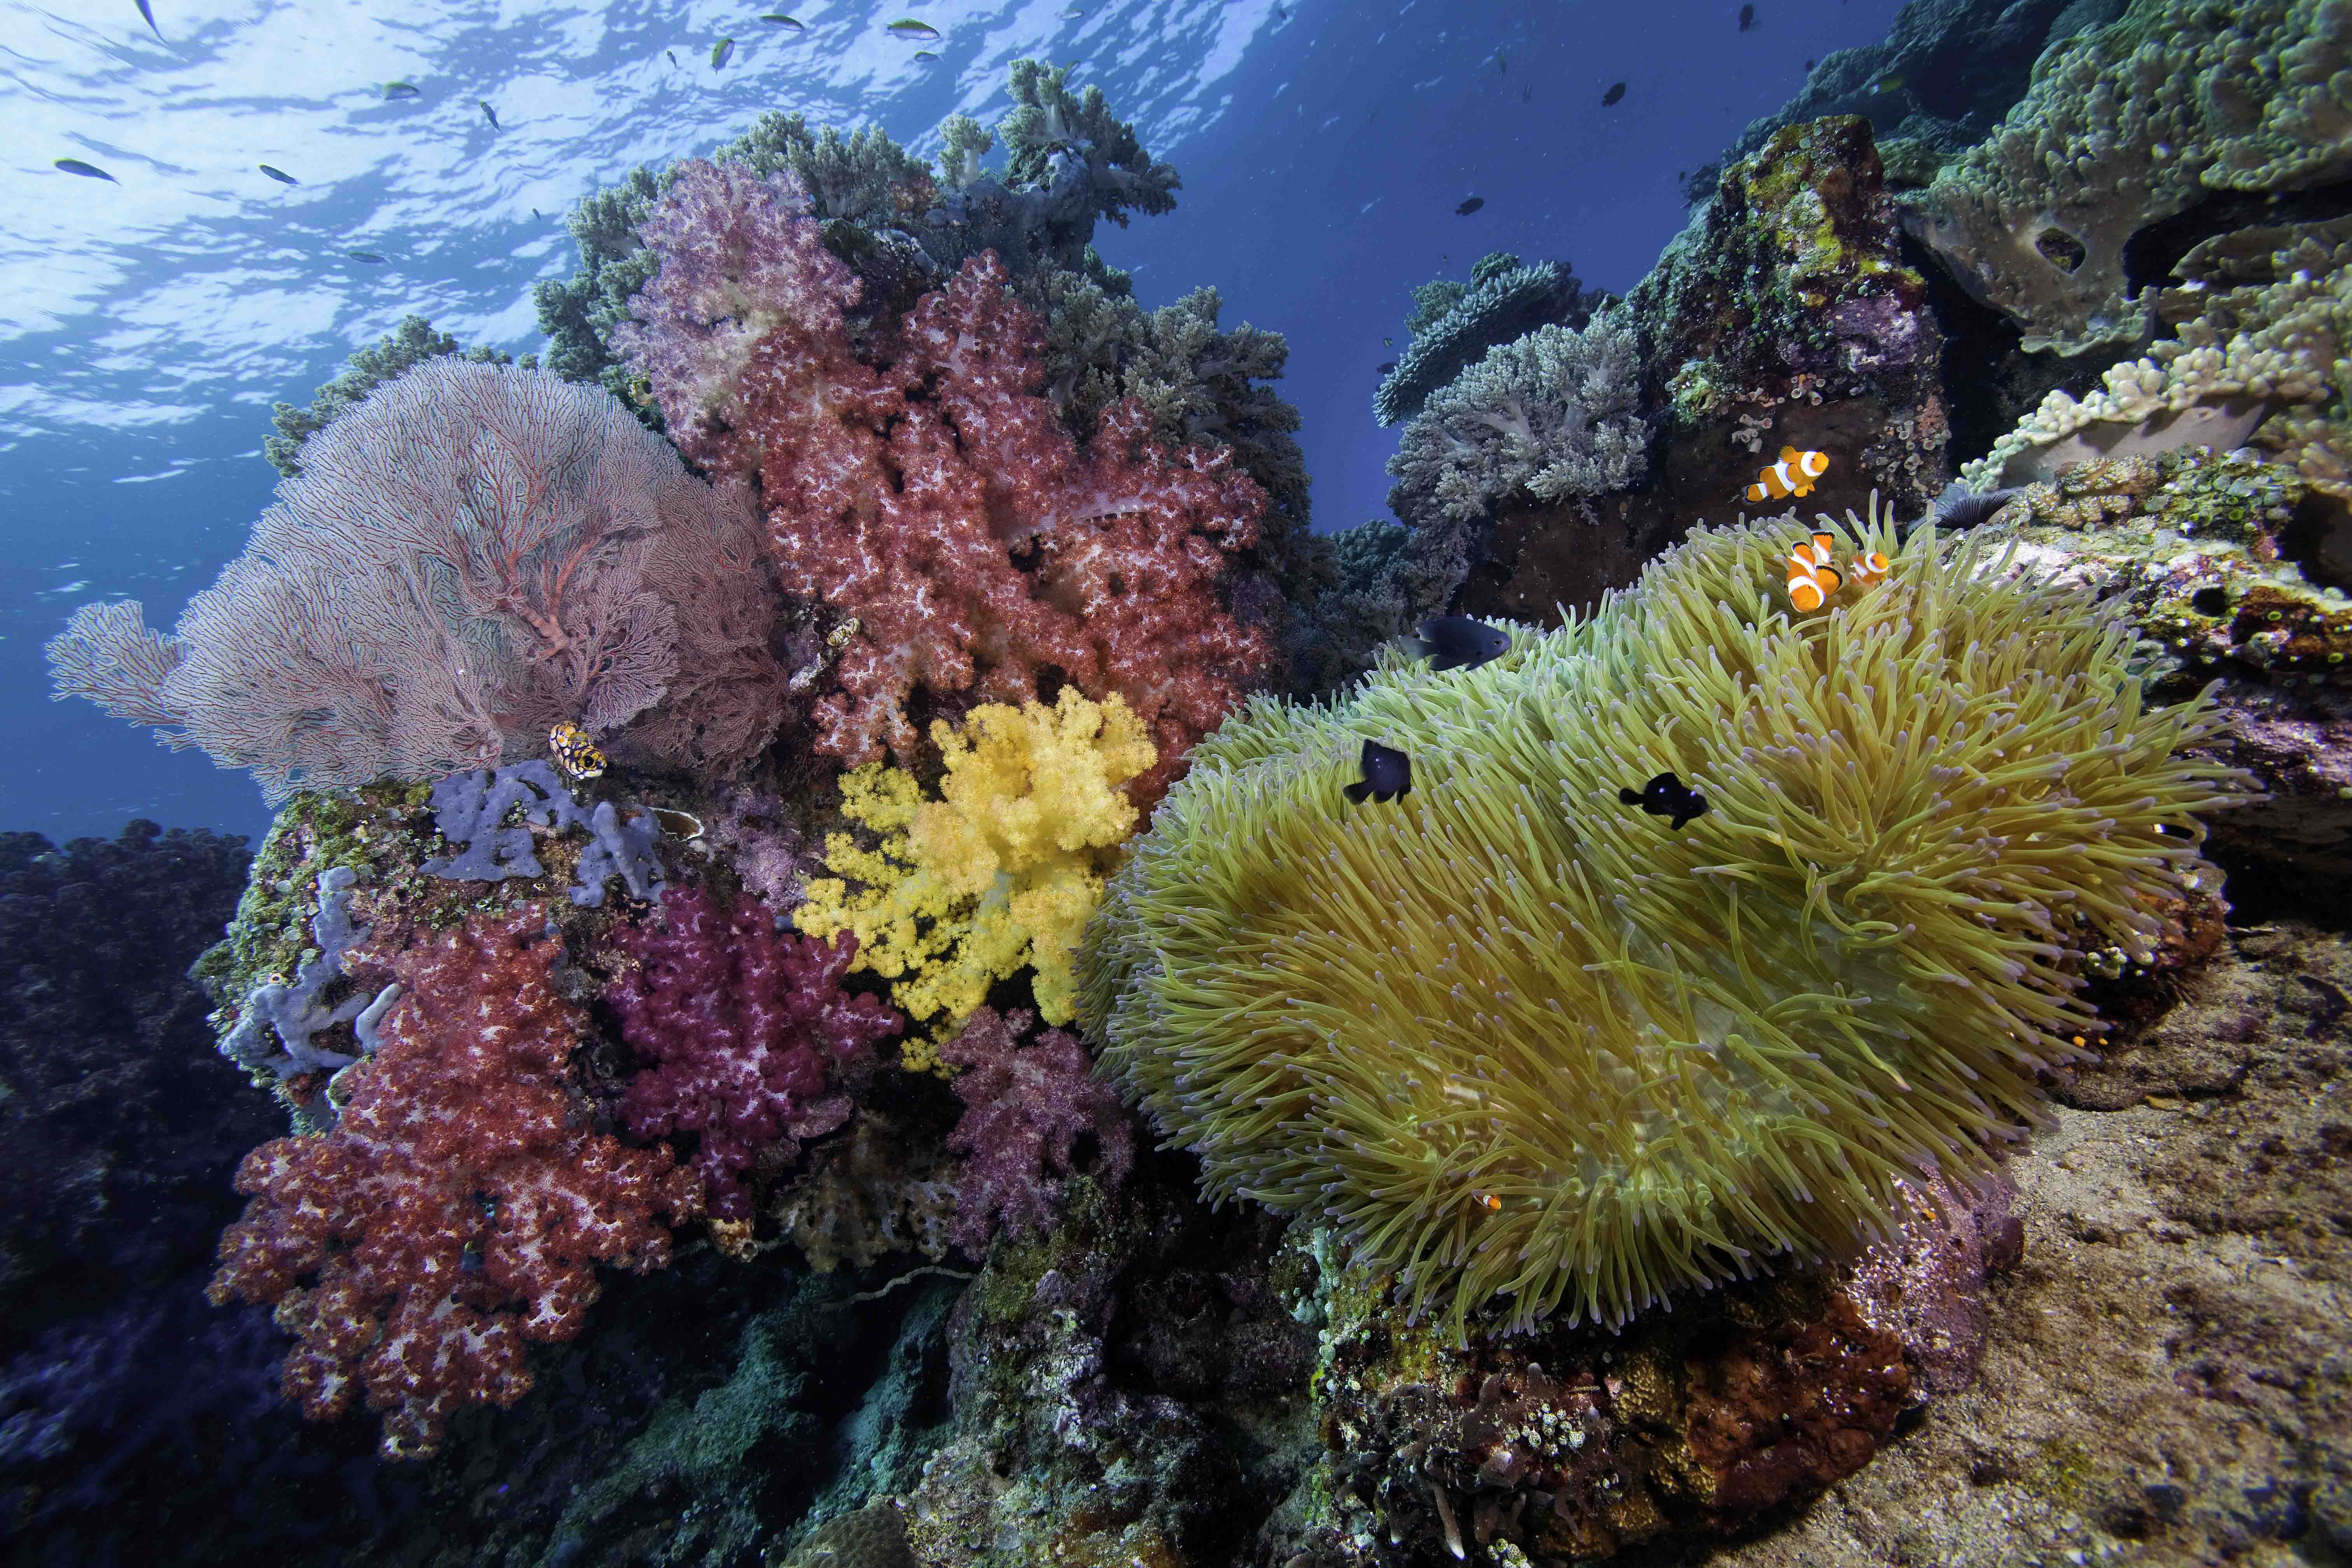 An underwater image of a vibrant and healthy coral reef